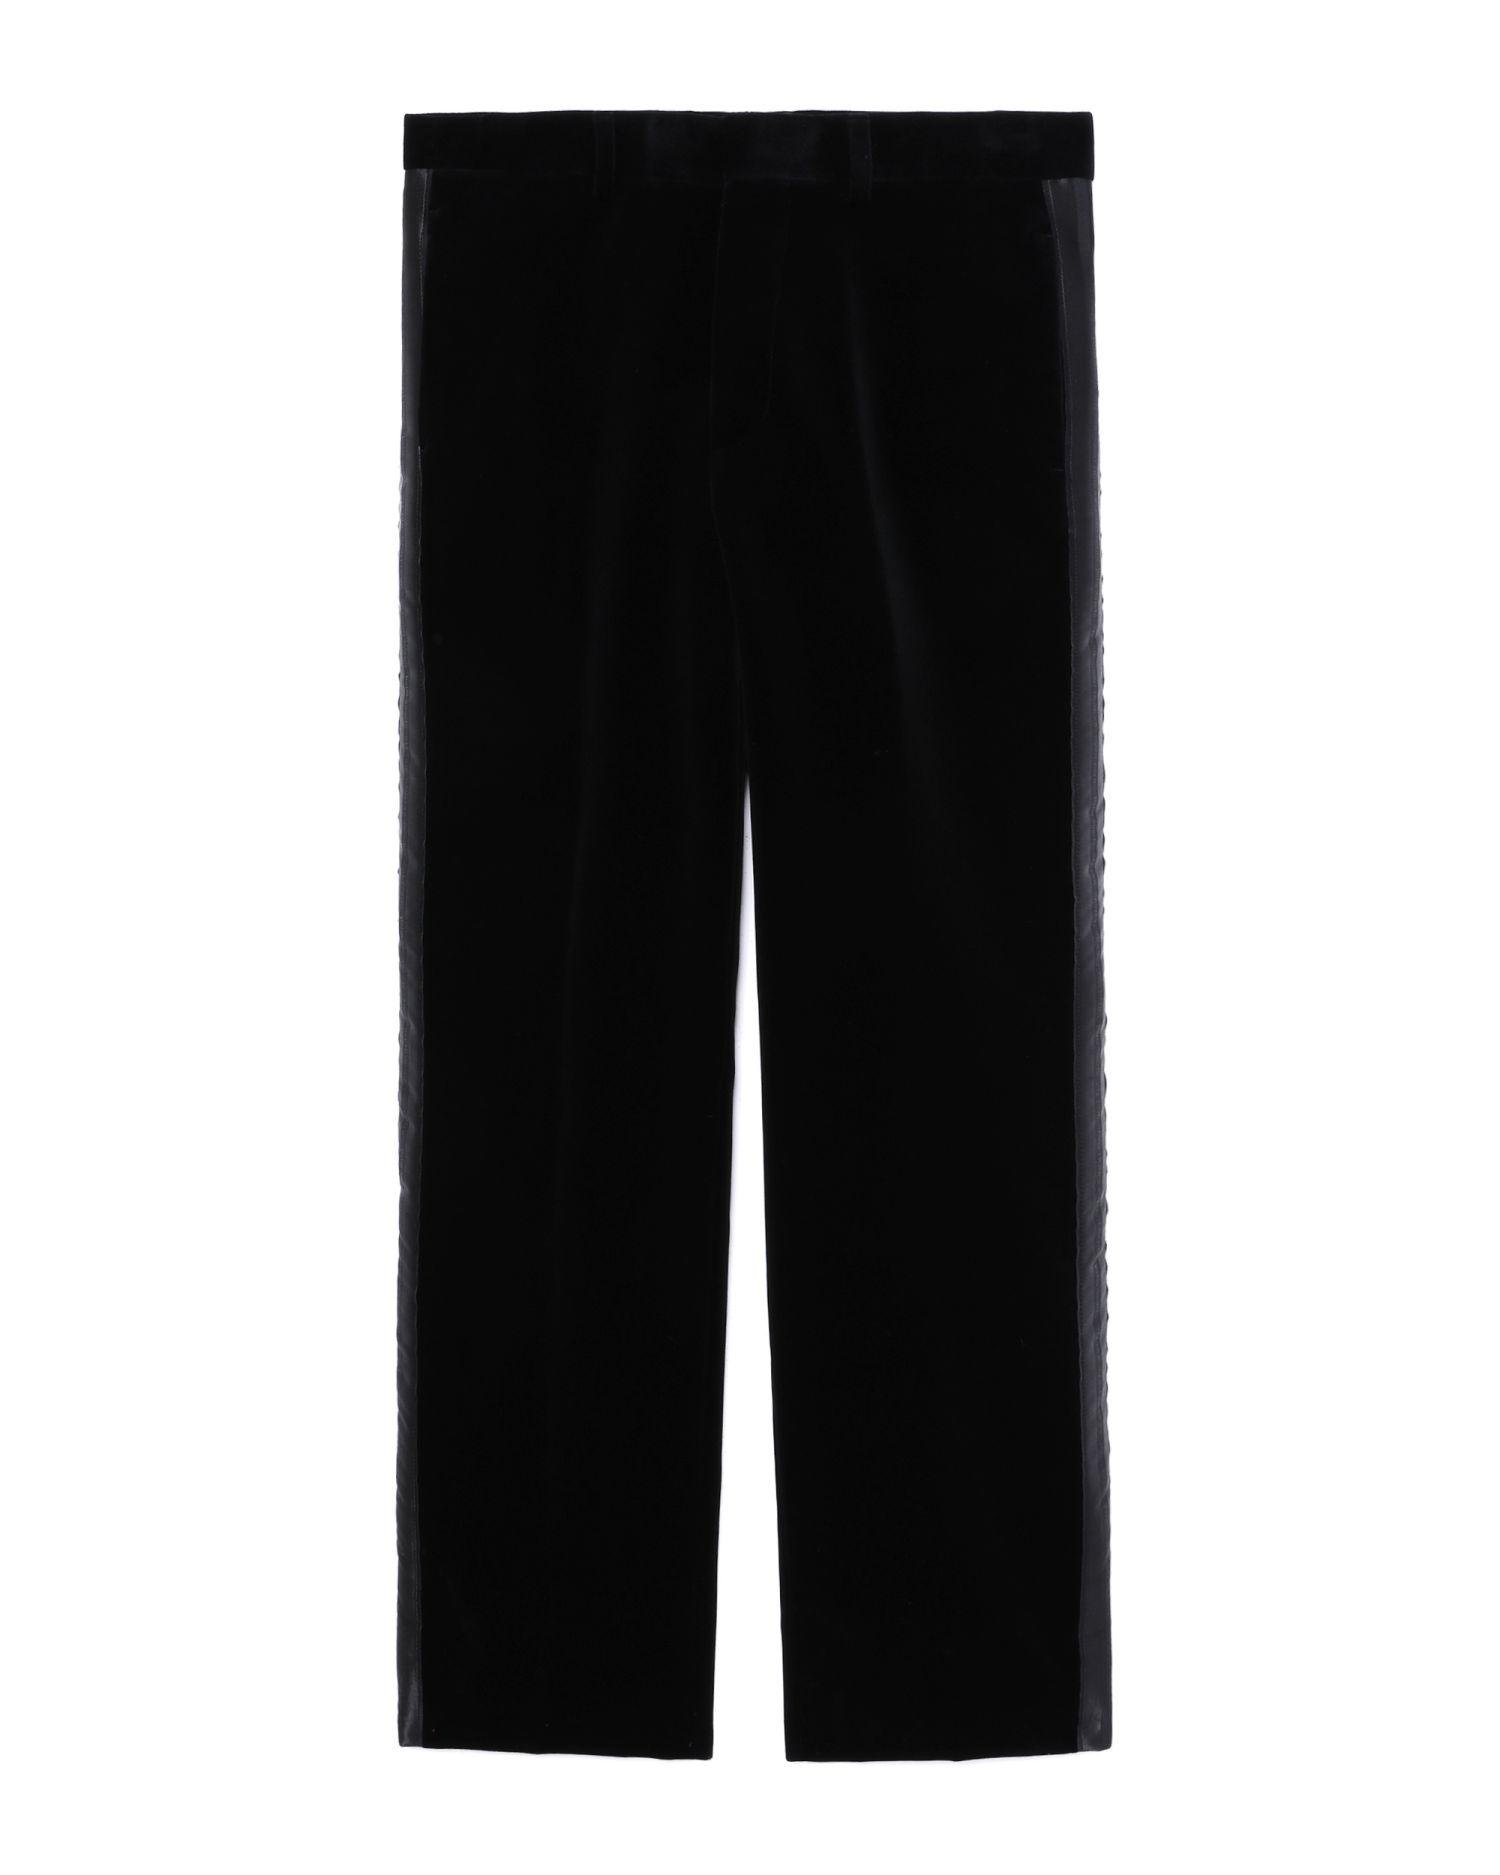 Velvet band suit pants by PALM ANGELS